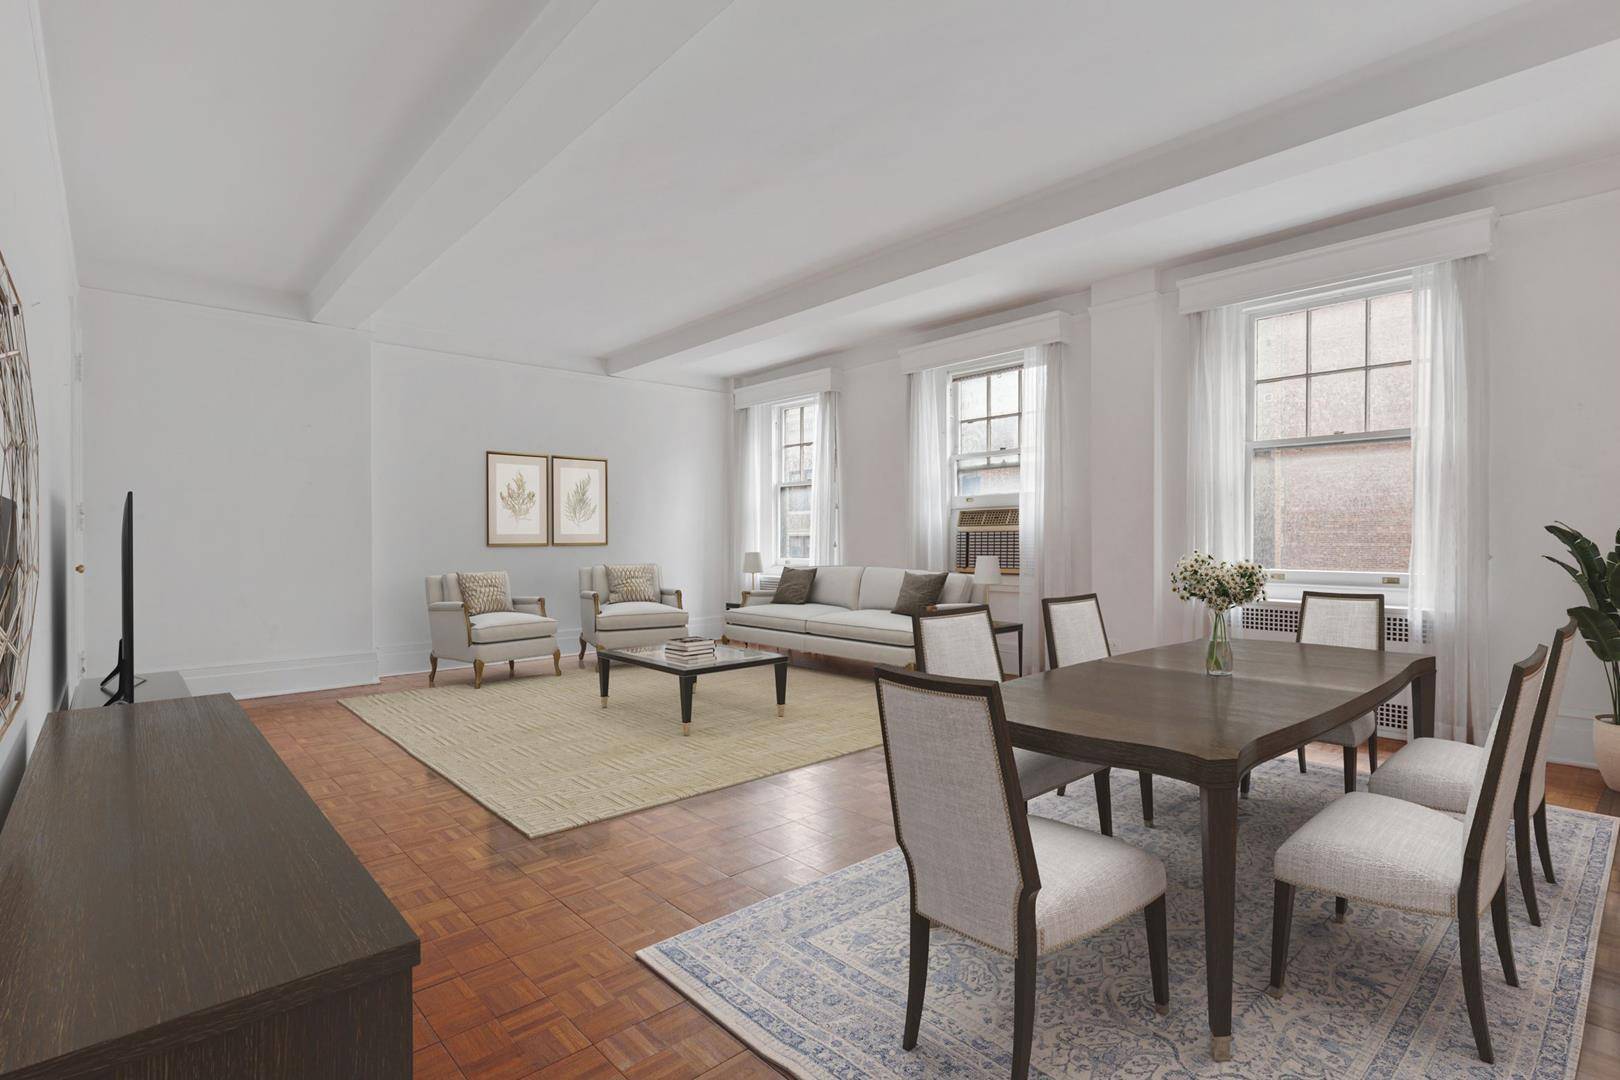 Bright amp ; Airy ! Apartment 7A at 969 Park Avenue a corner unit with a flexible, classic six layout, conveniently located on the Upper East Side in a fantastic ...